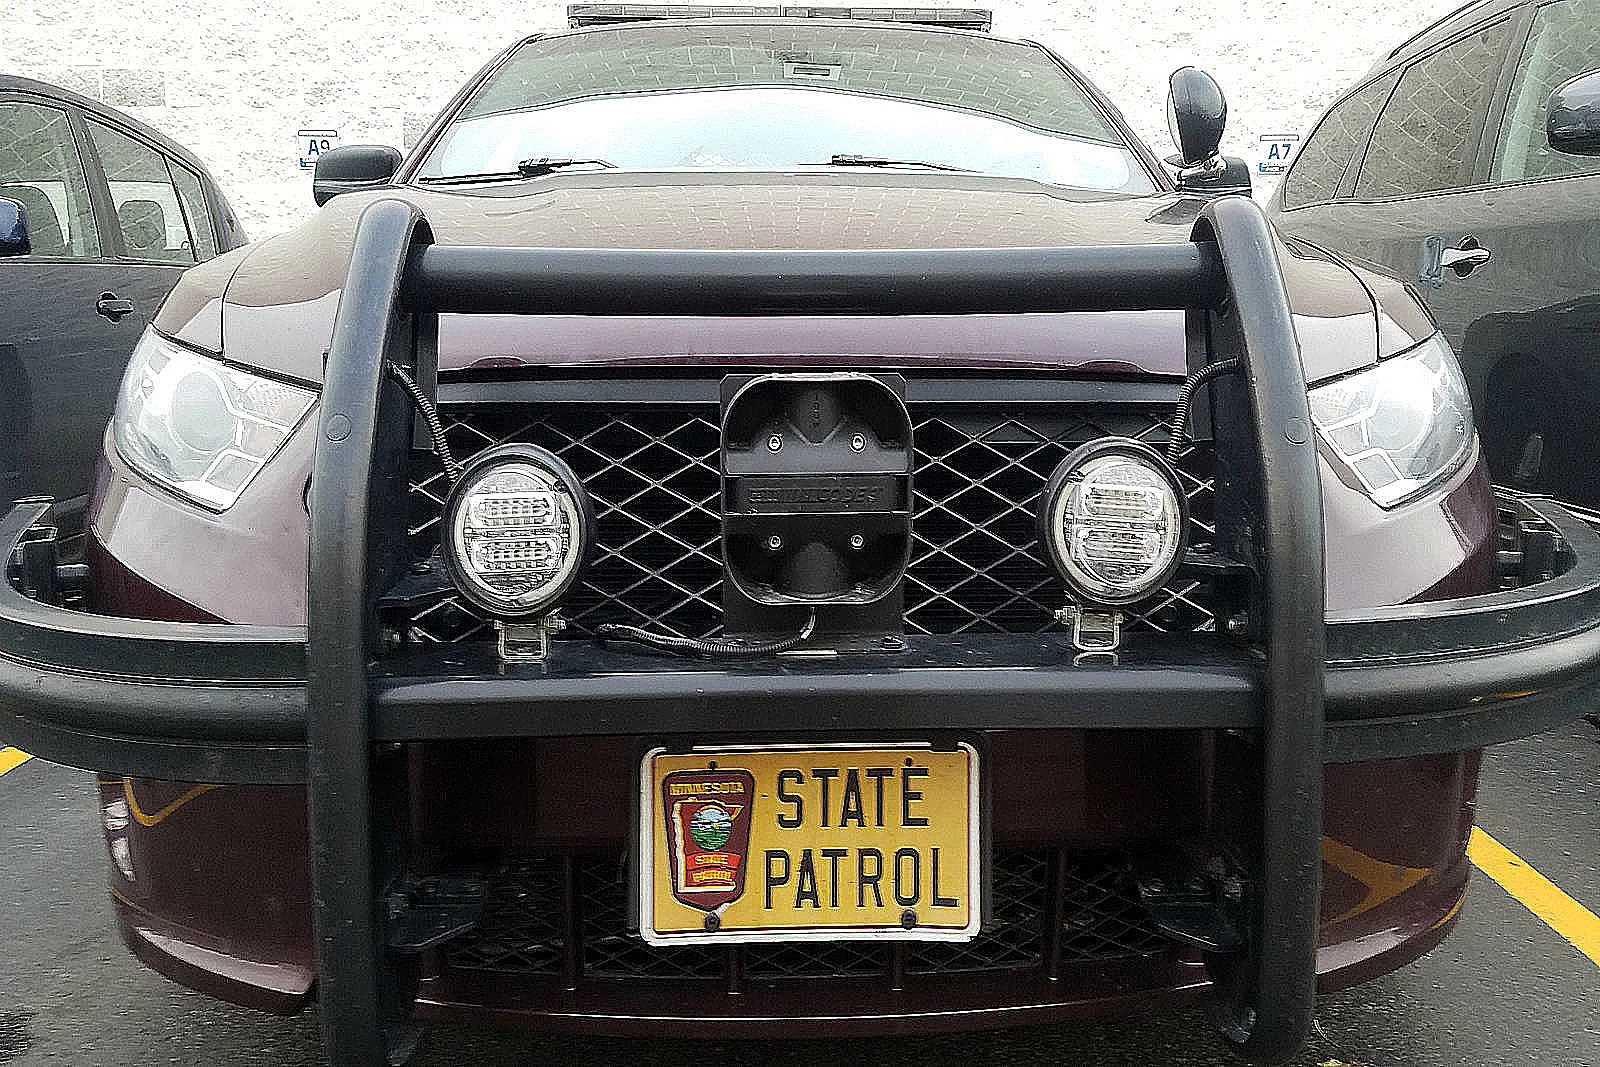 Princeton Man Hurt in Crash in Mille Lacs County